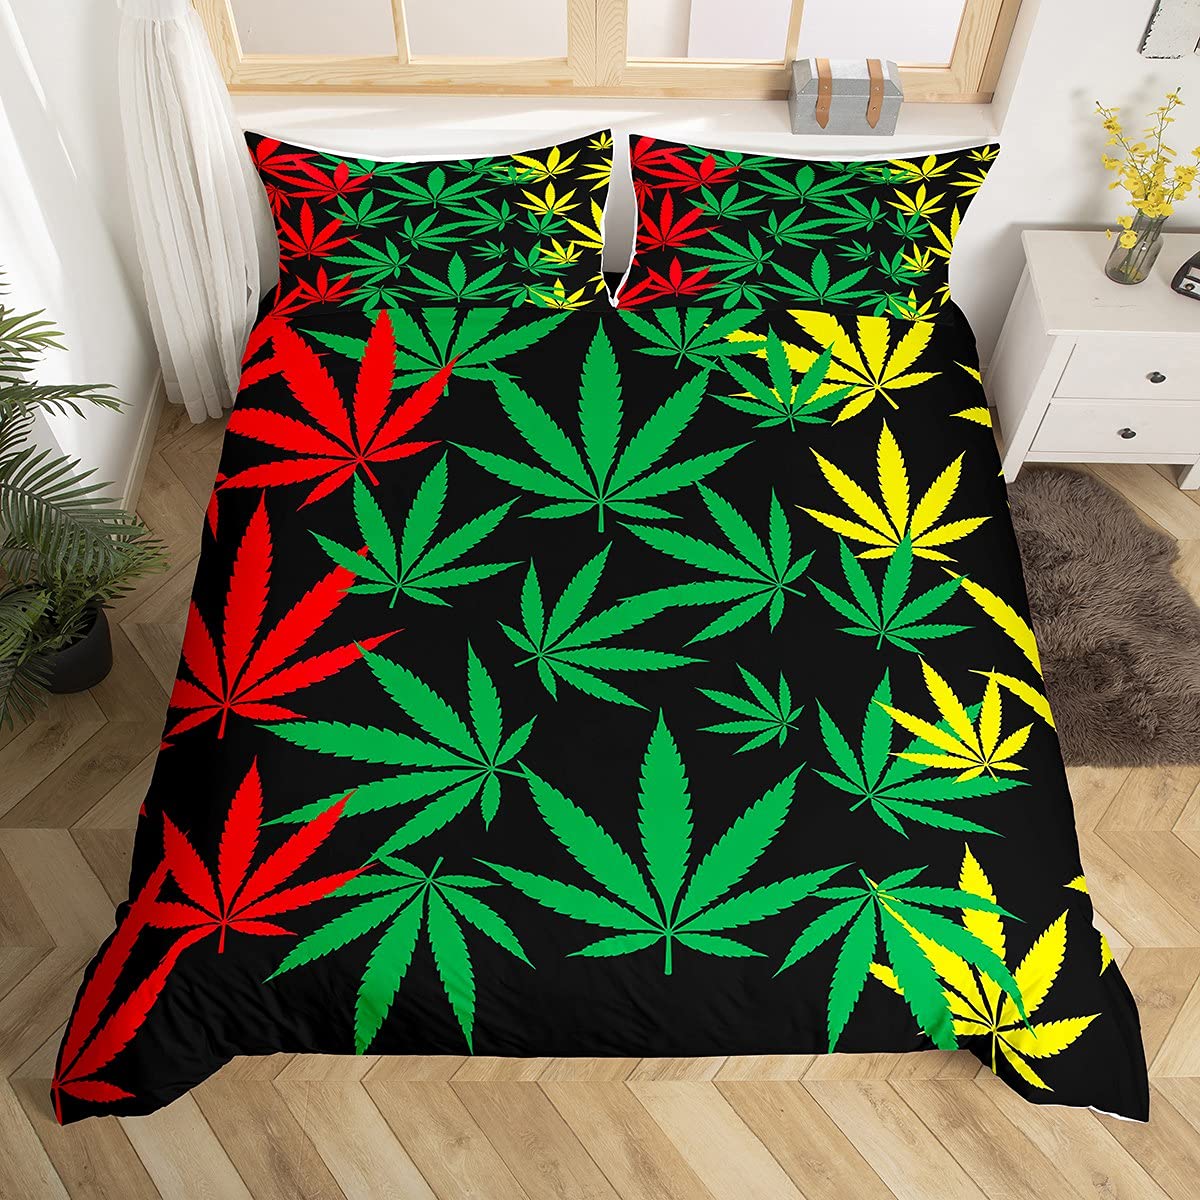 Assorted Psychedelic Cannabis Leaf Duvet Cover Sets